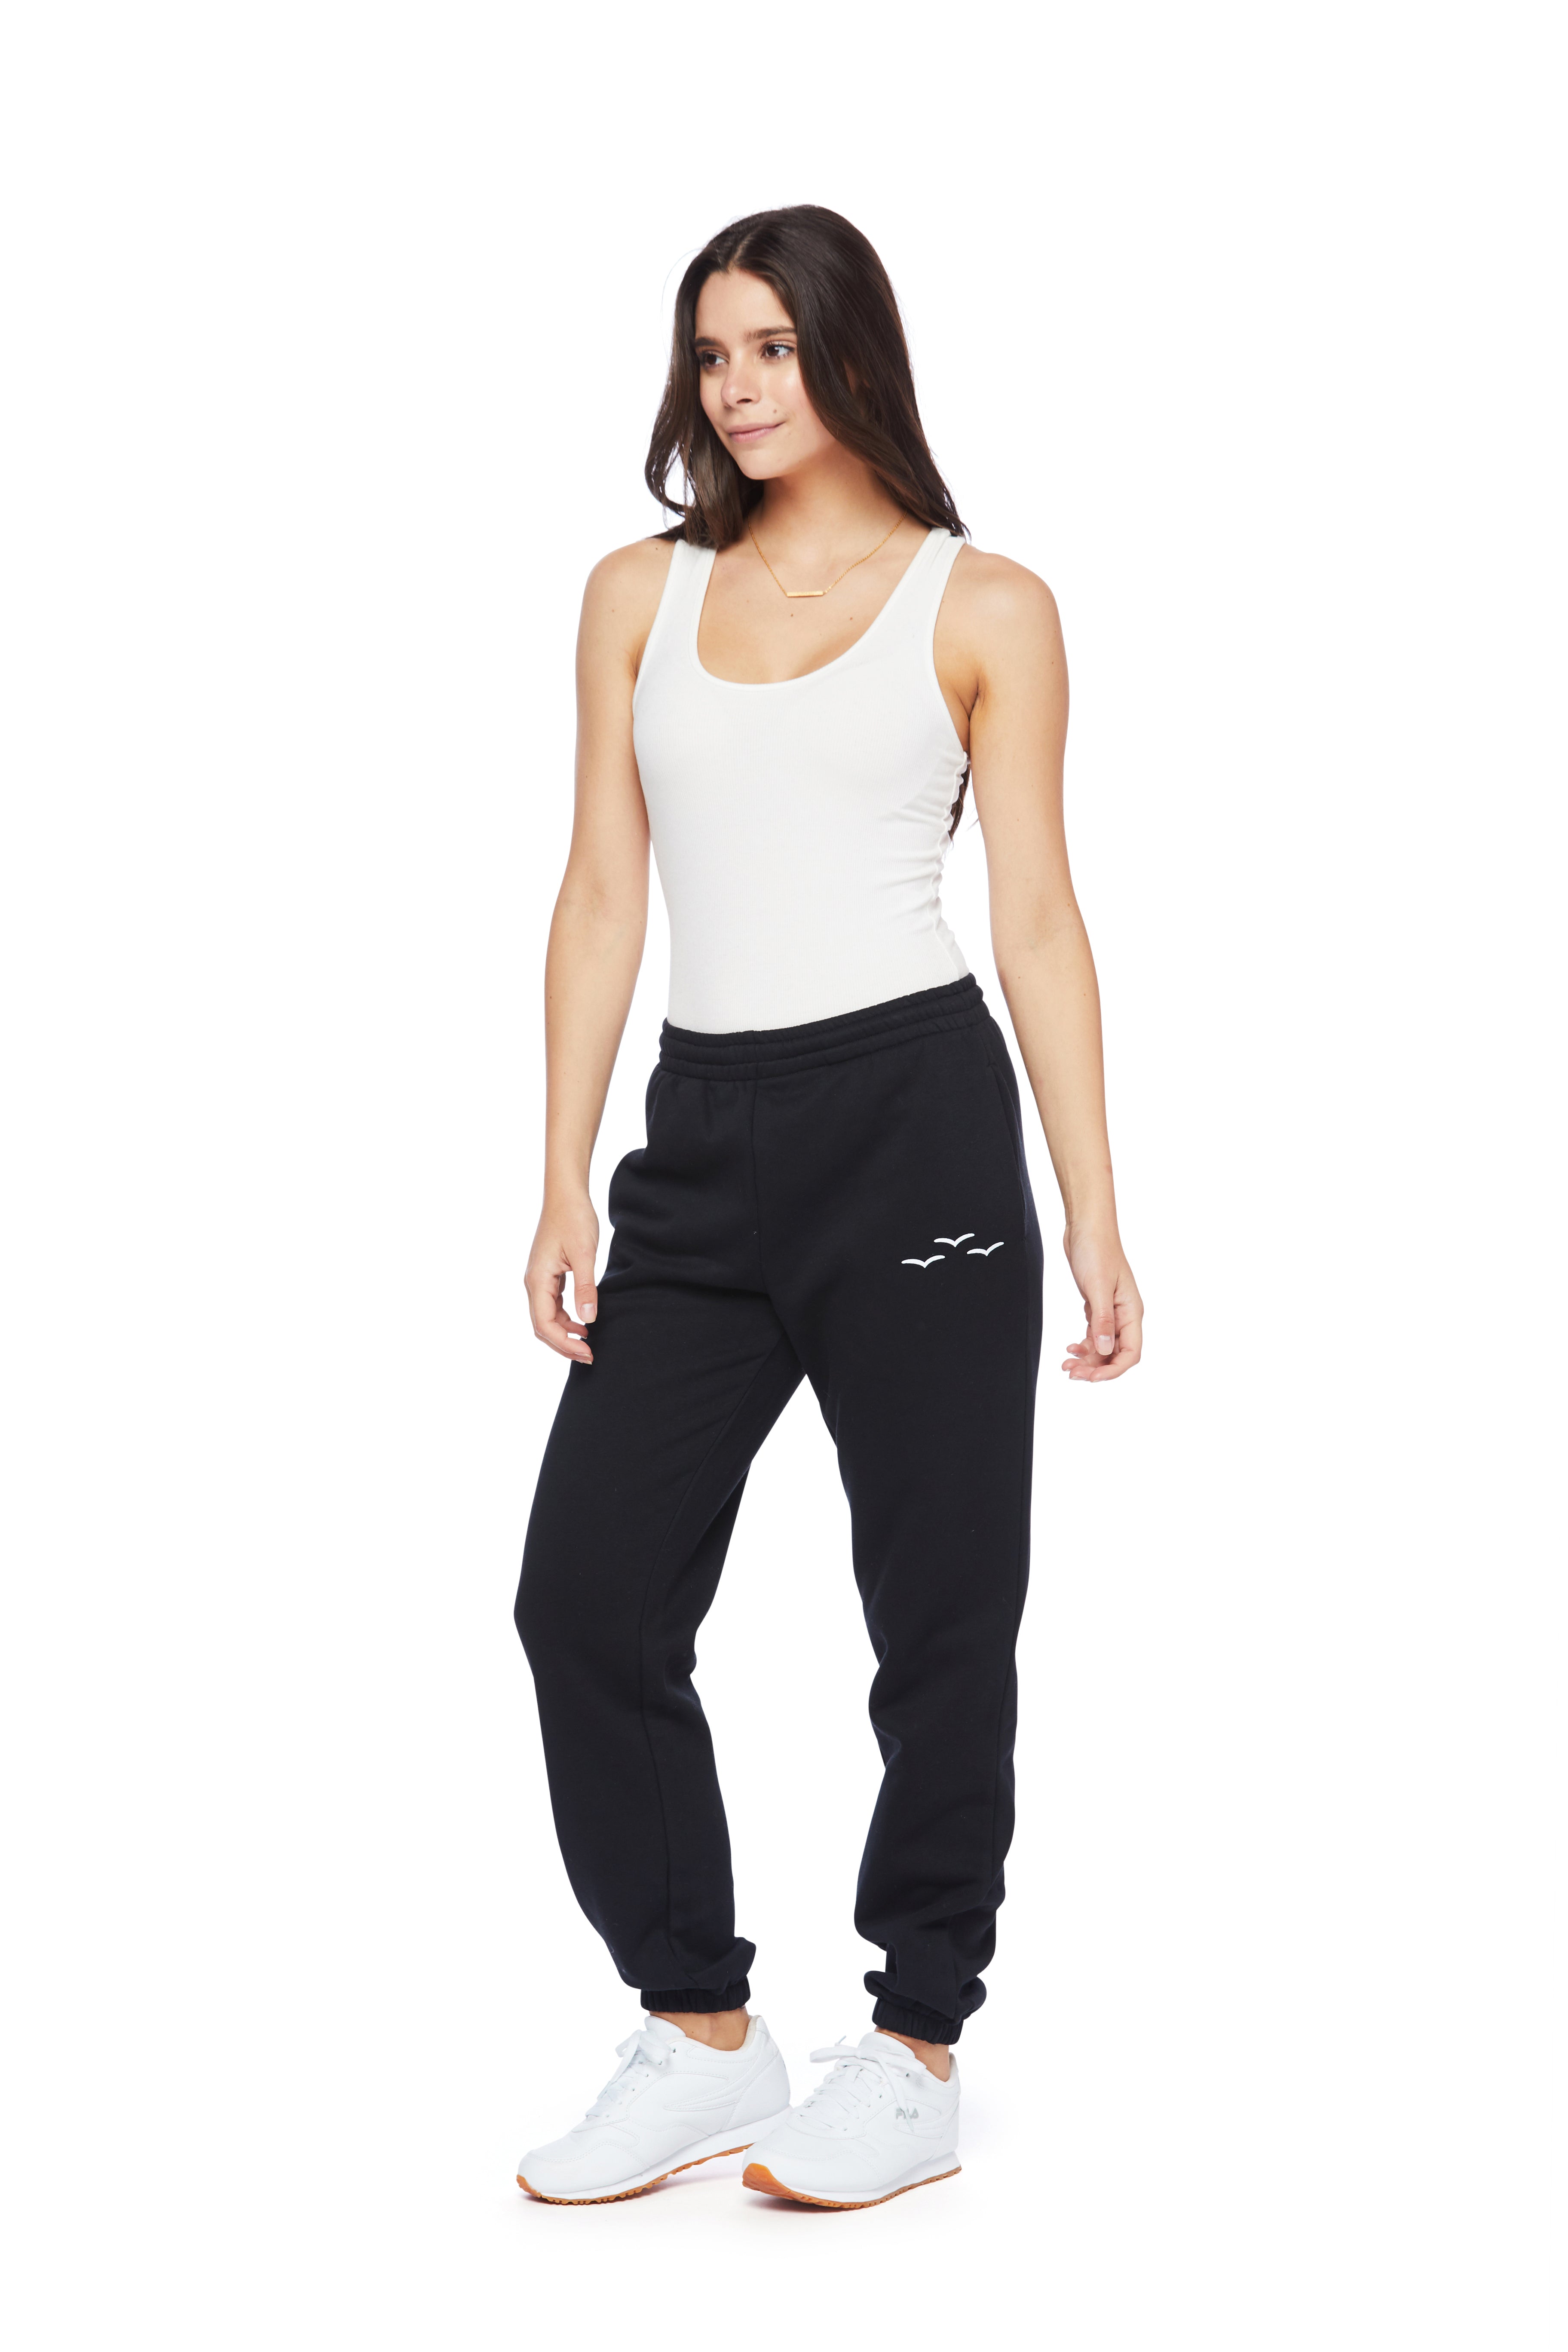 Trending Wholesale Joggers for Girls At Affordable Prices 